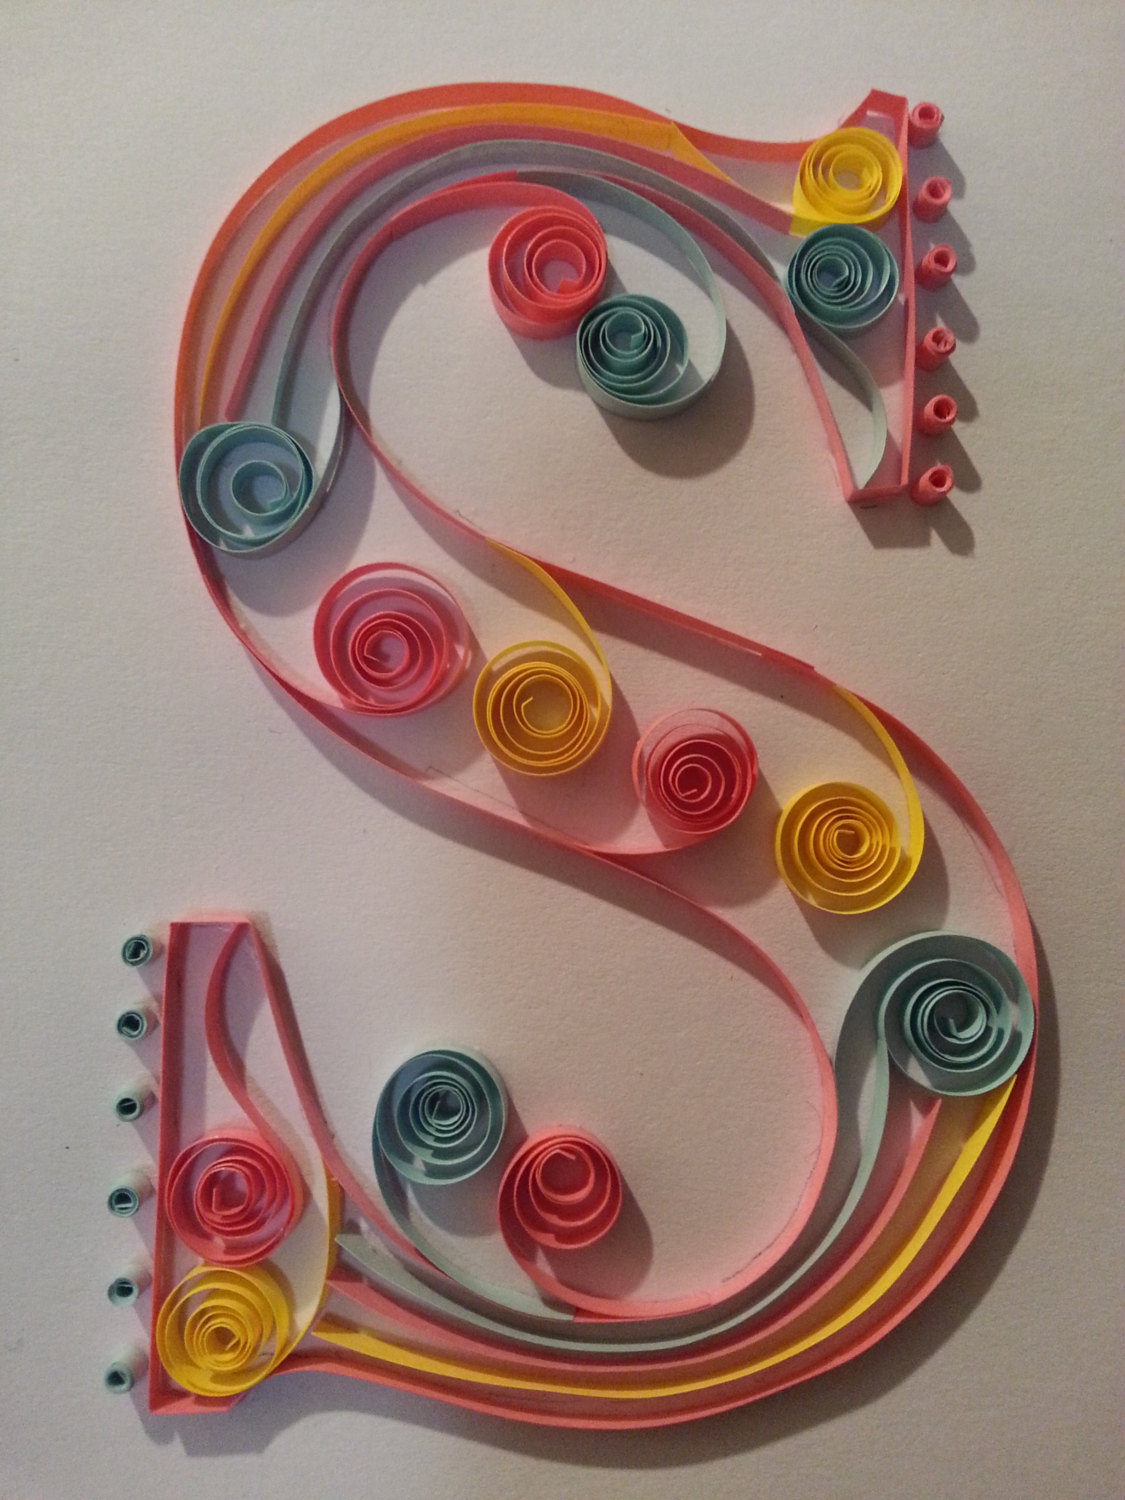 Quilled Monogram Letter S Via Etsy Wallpaper Wp2008492 - Quilling Letters S - HD Wallpaper 